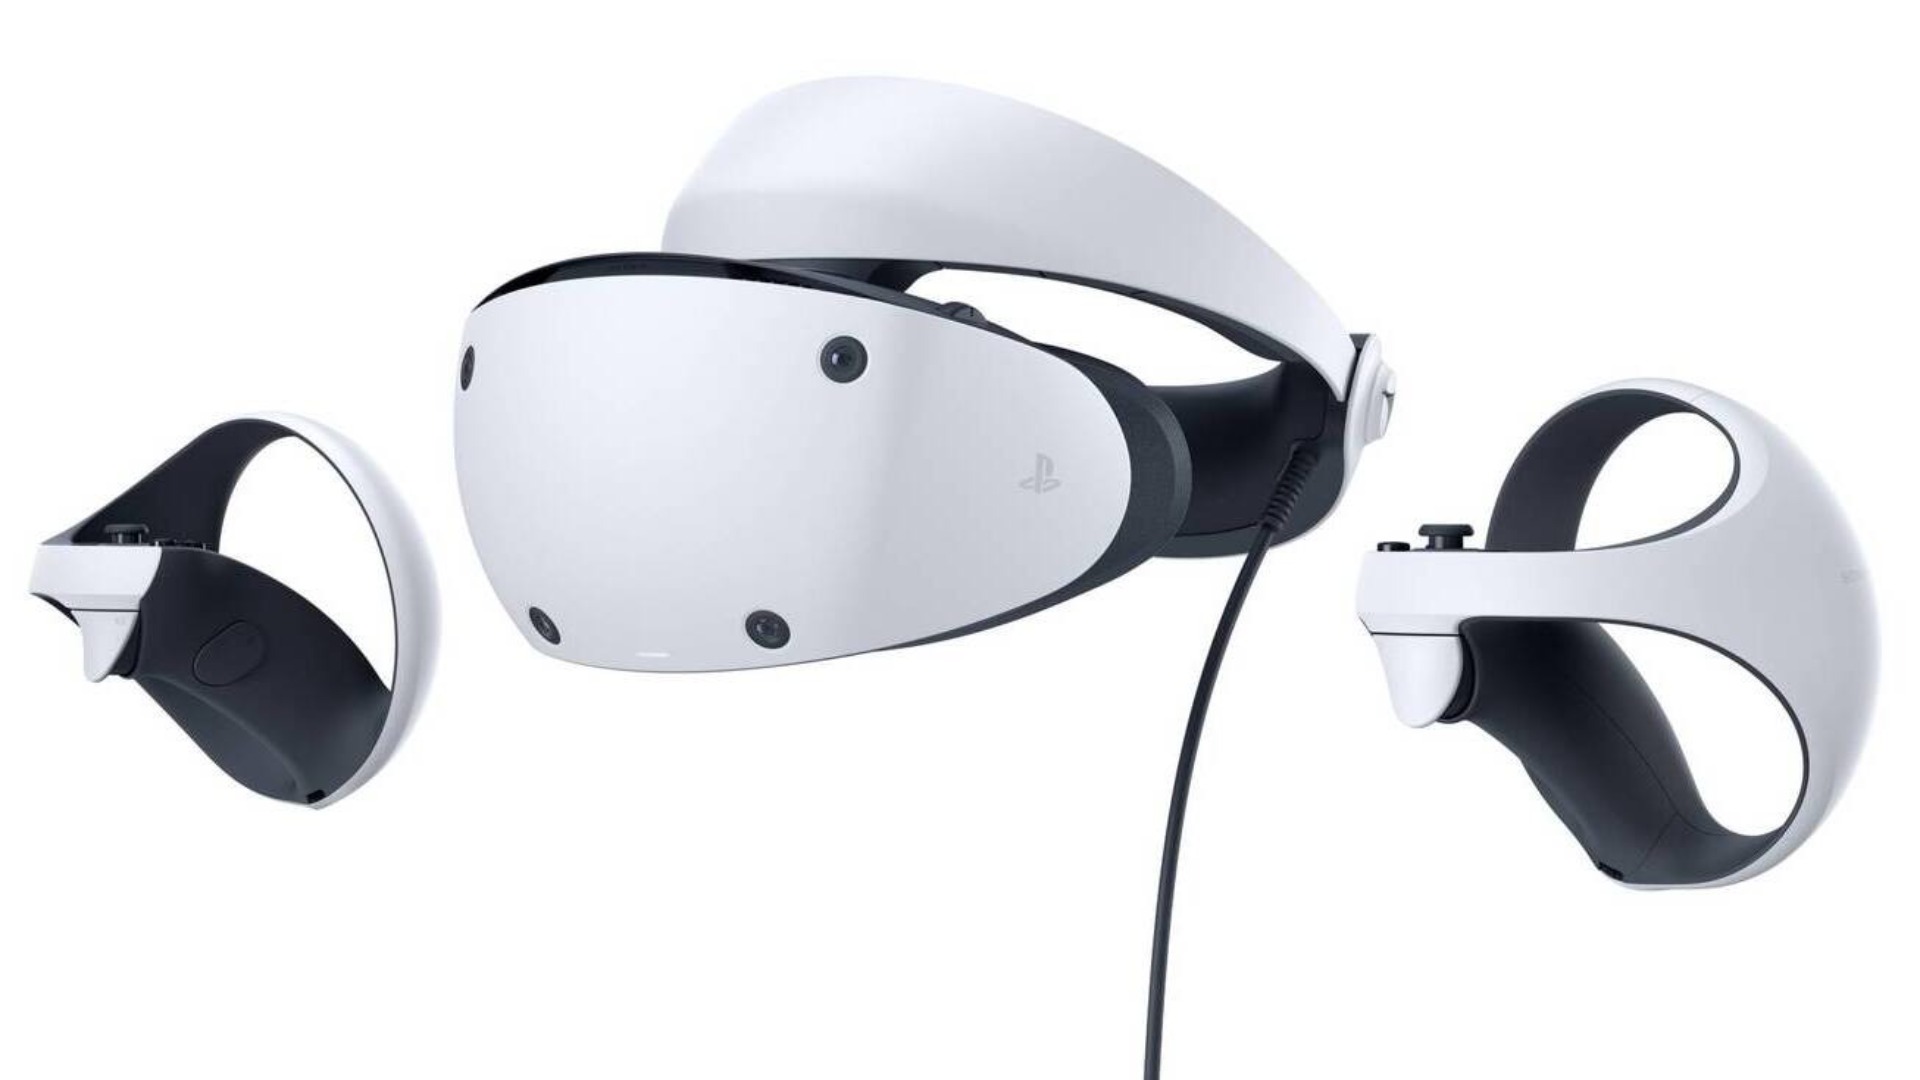 First image of the PSVR 2 headset and its controllers